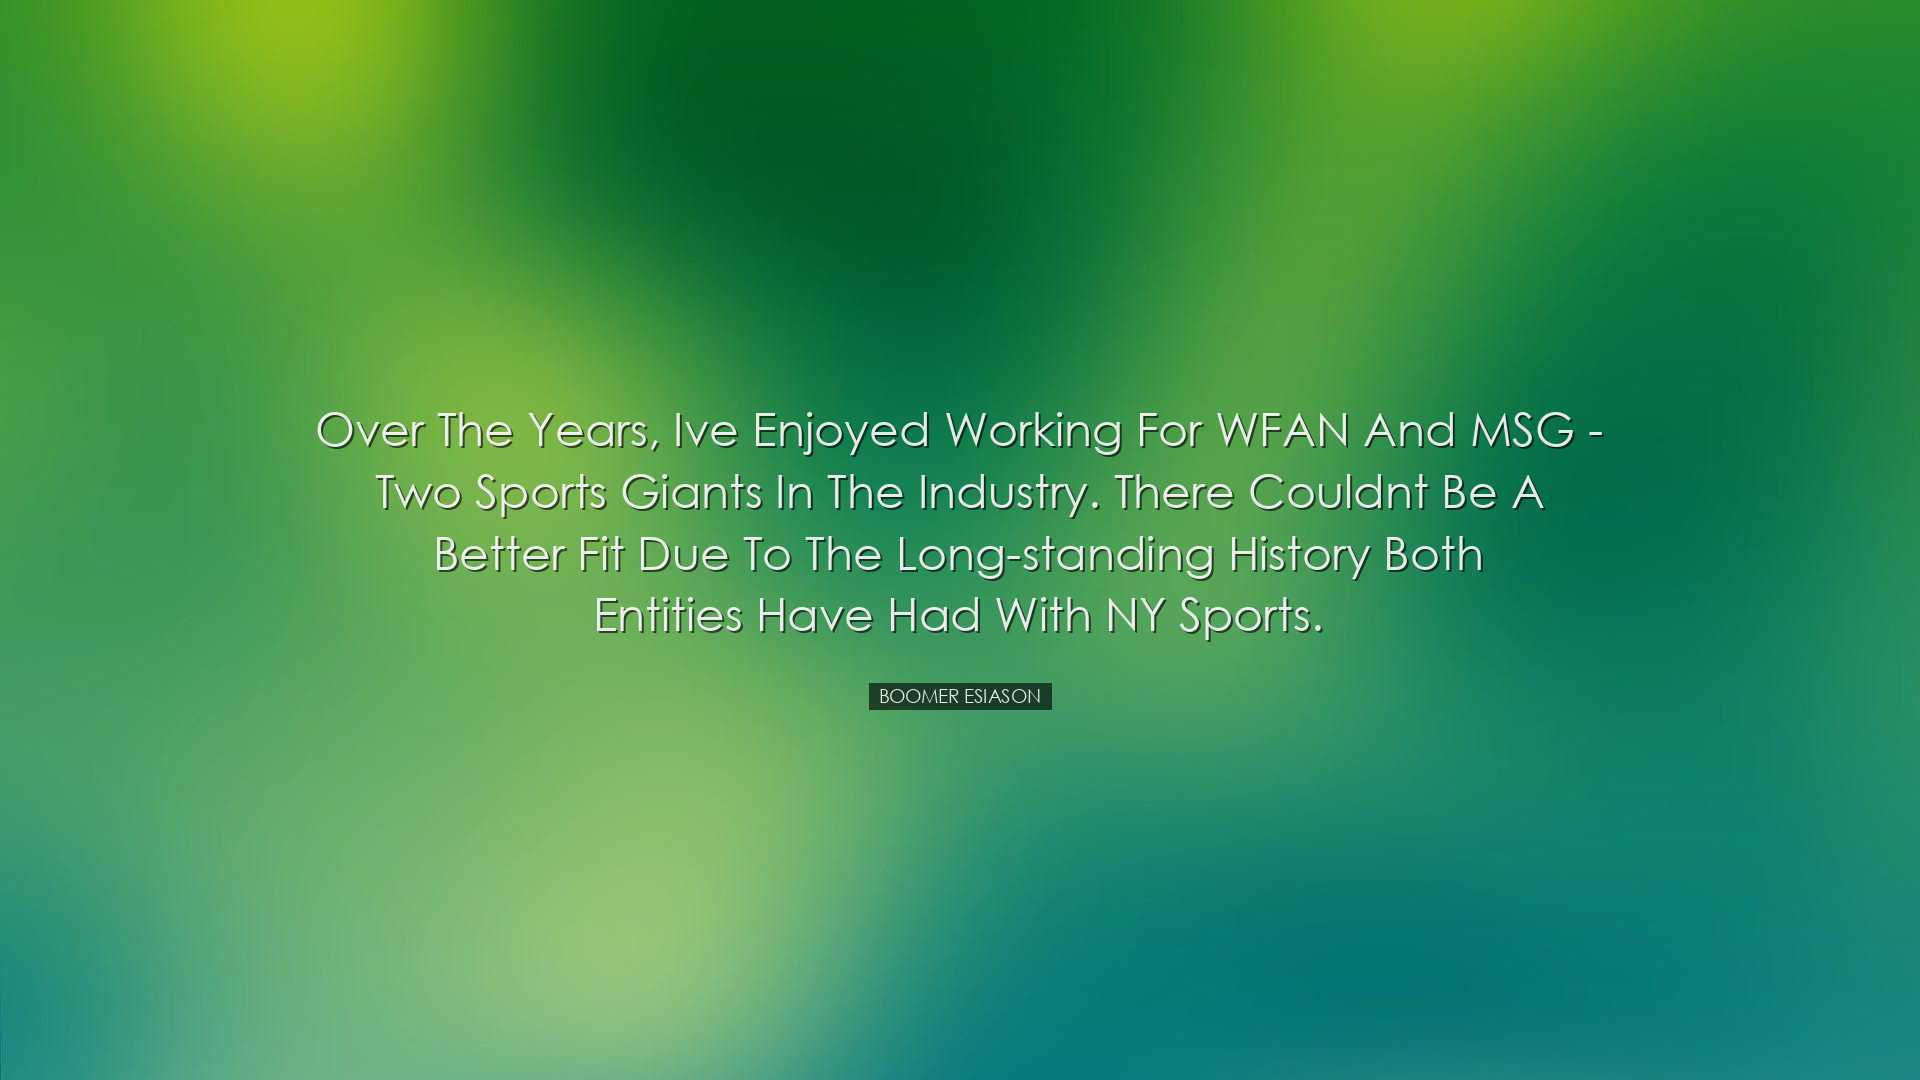 Over the years, Ive enjoyed working for WFAN and MSG - two sports